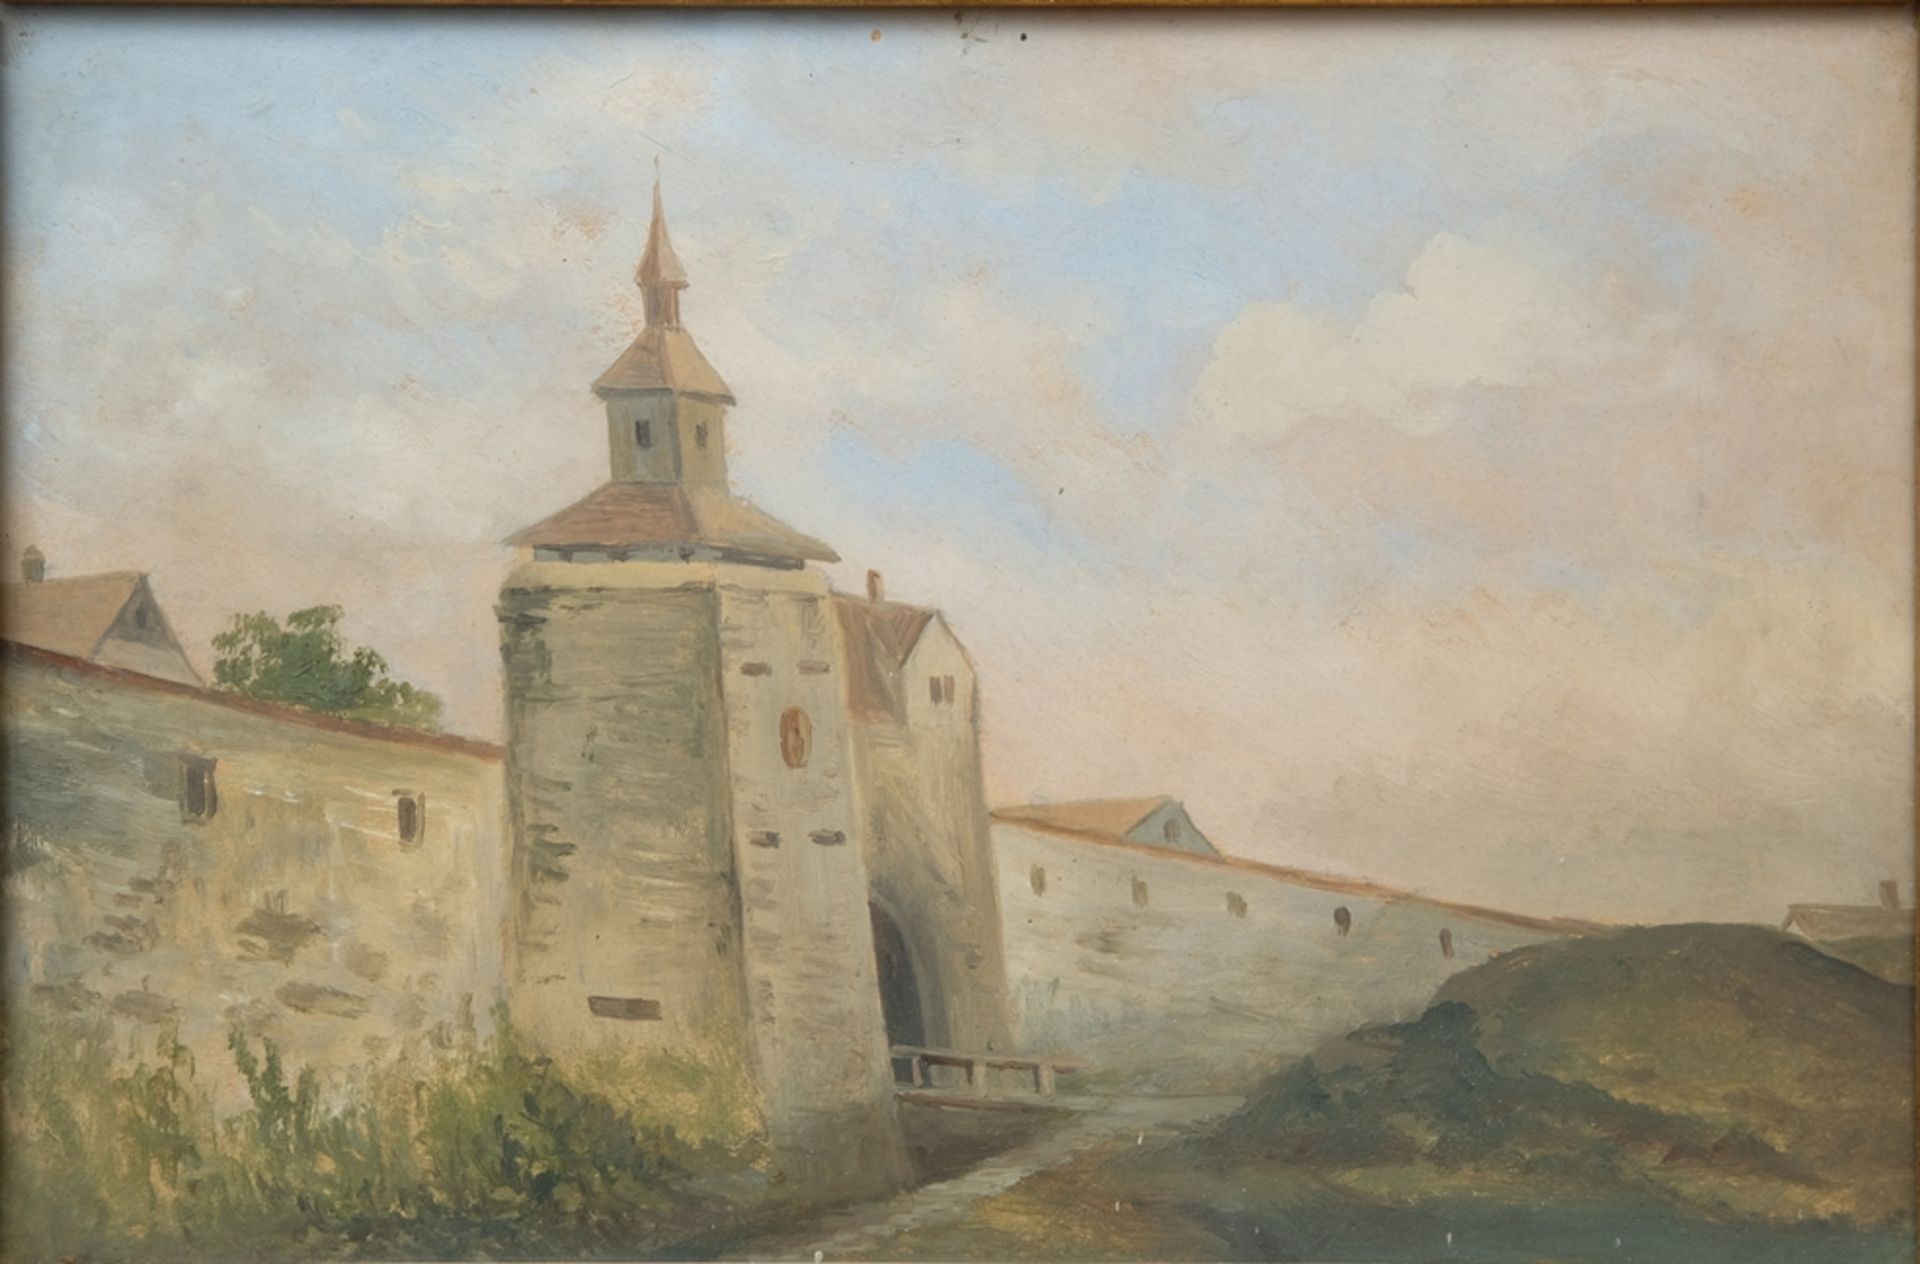 Unknown Constance (1899), City gate and section of the city wall, oil on wood. Artist unknown. 